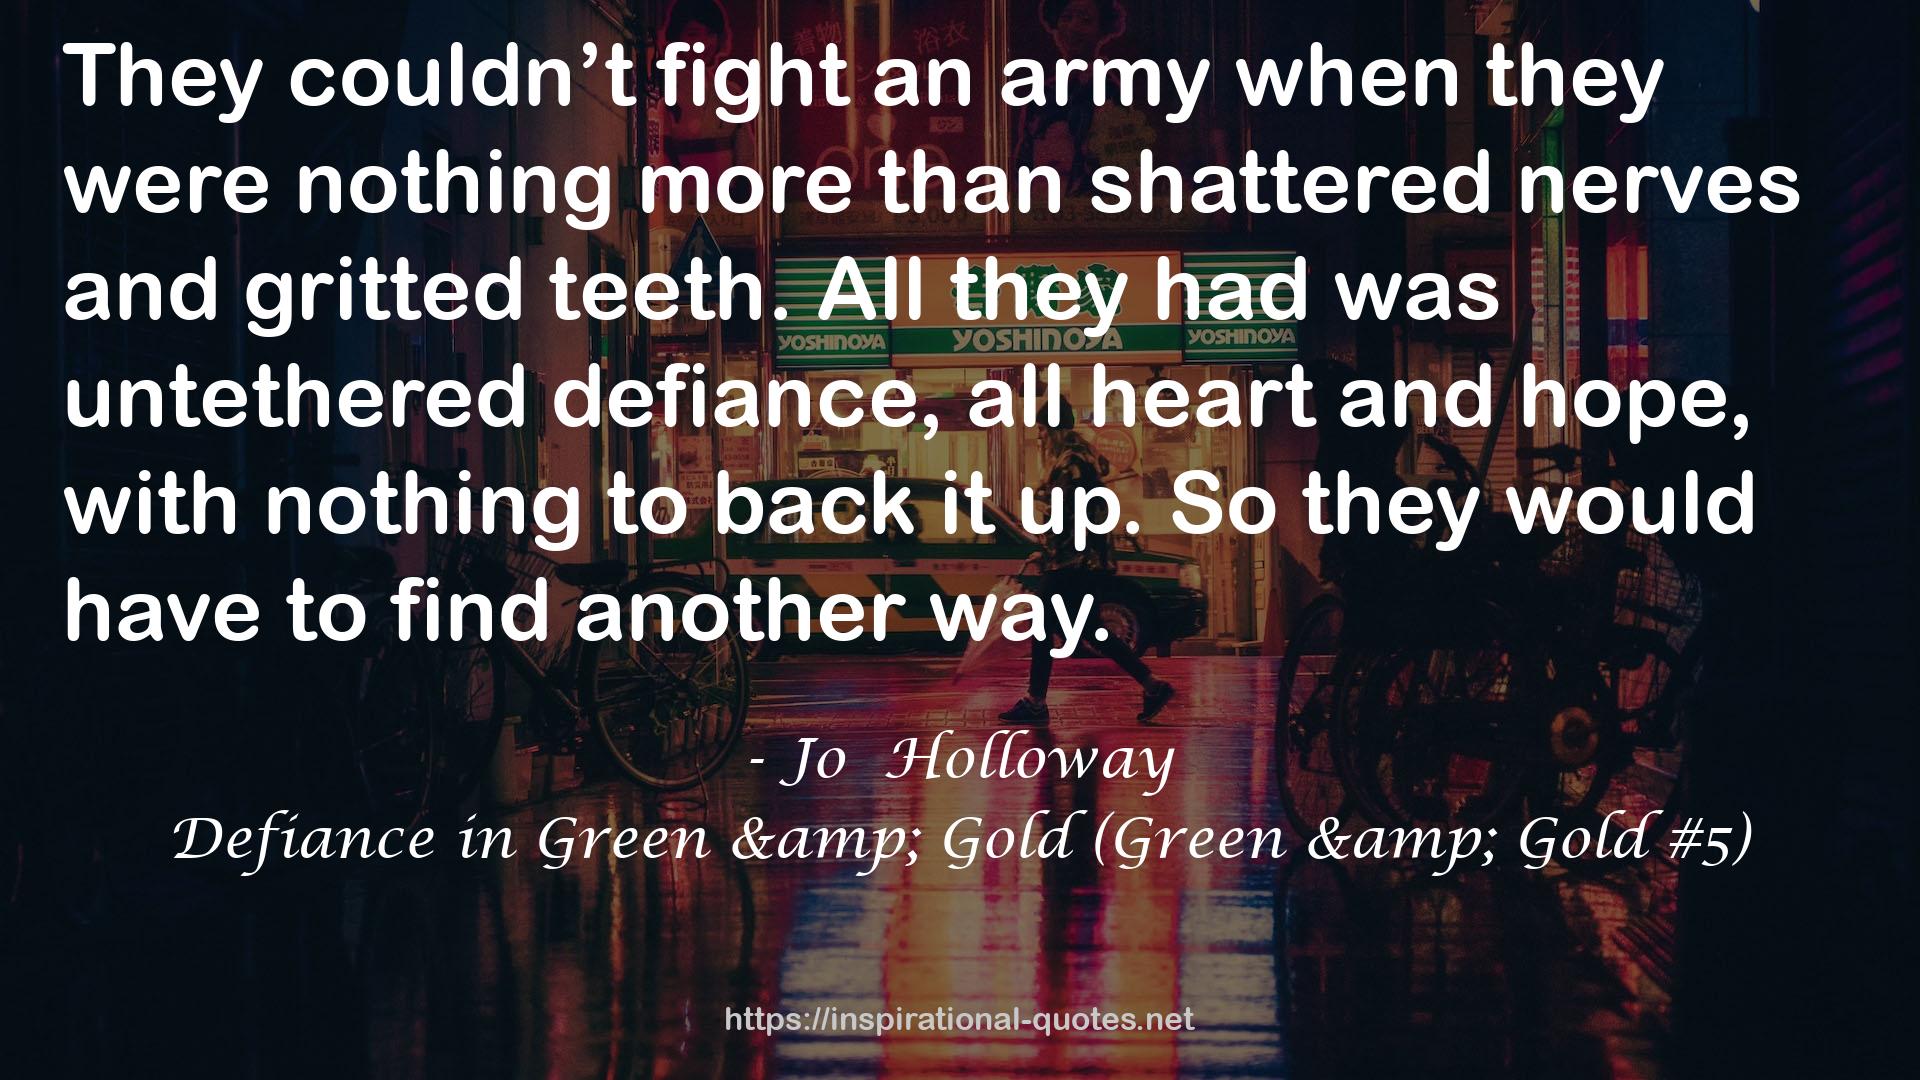 Defiance in Green & Gold (Green & Gold #5) QUOTES